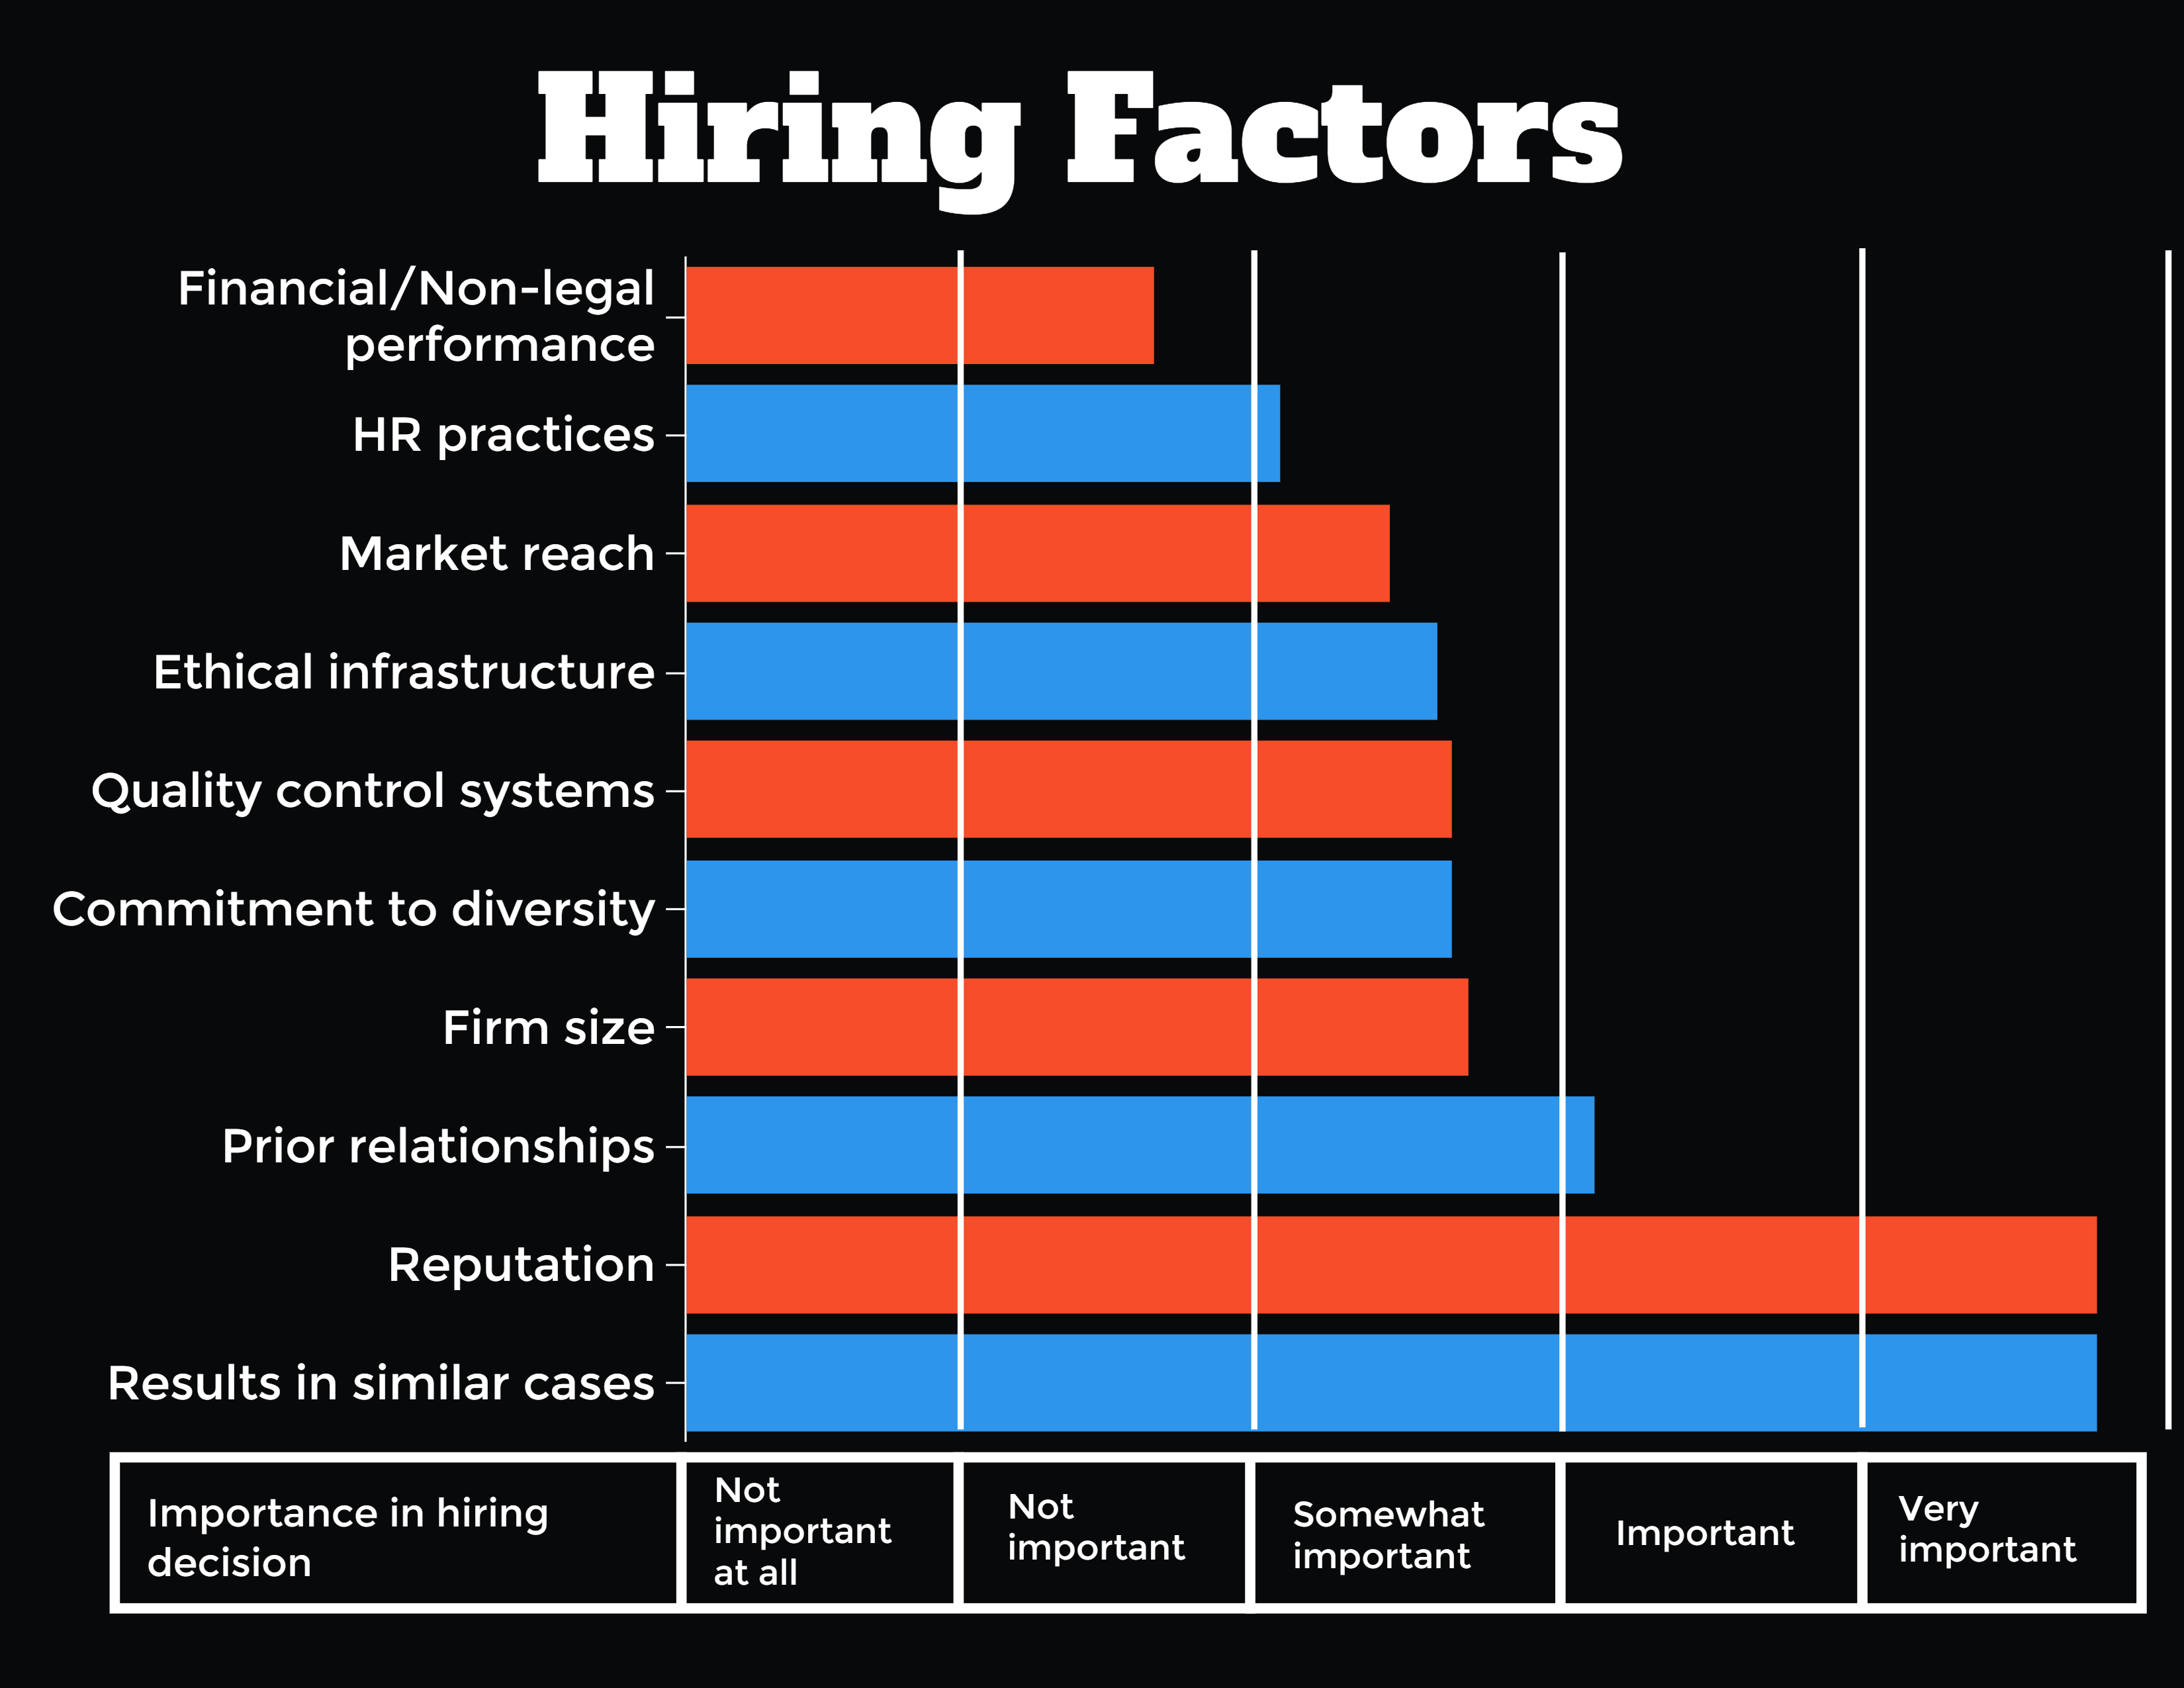 Chart that shows Hiring Factors and how important they were in hiring decisions, with results in similar cases being the most important and "financial/non-legal performance" being the least.